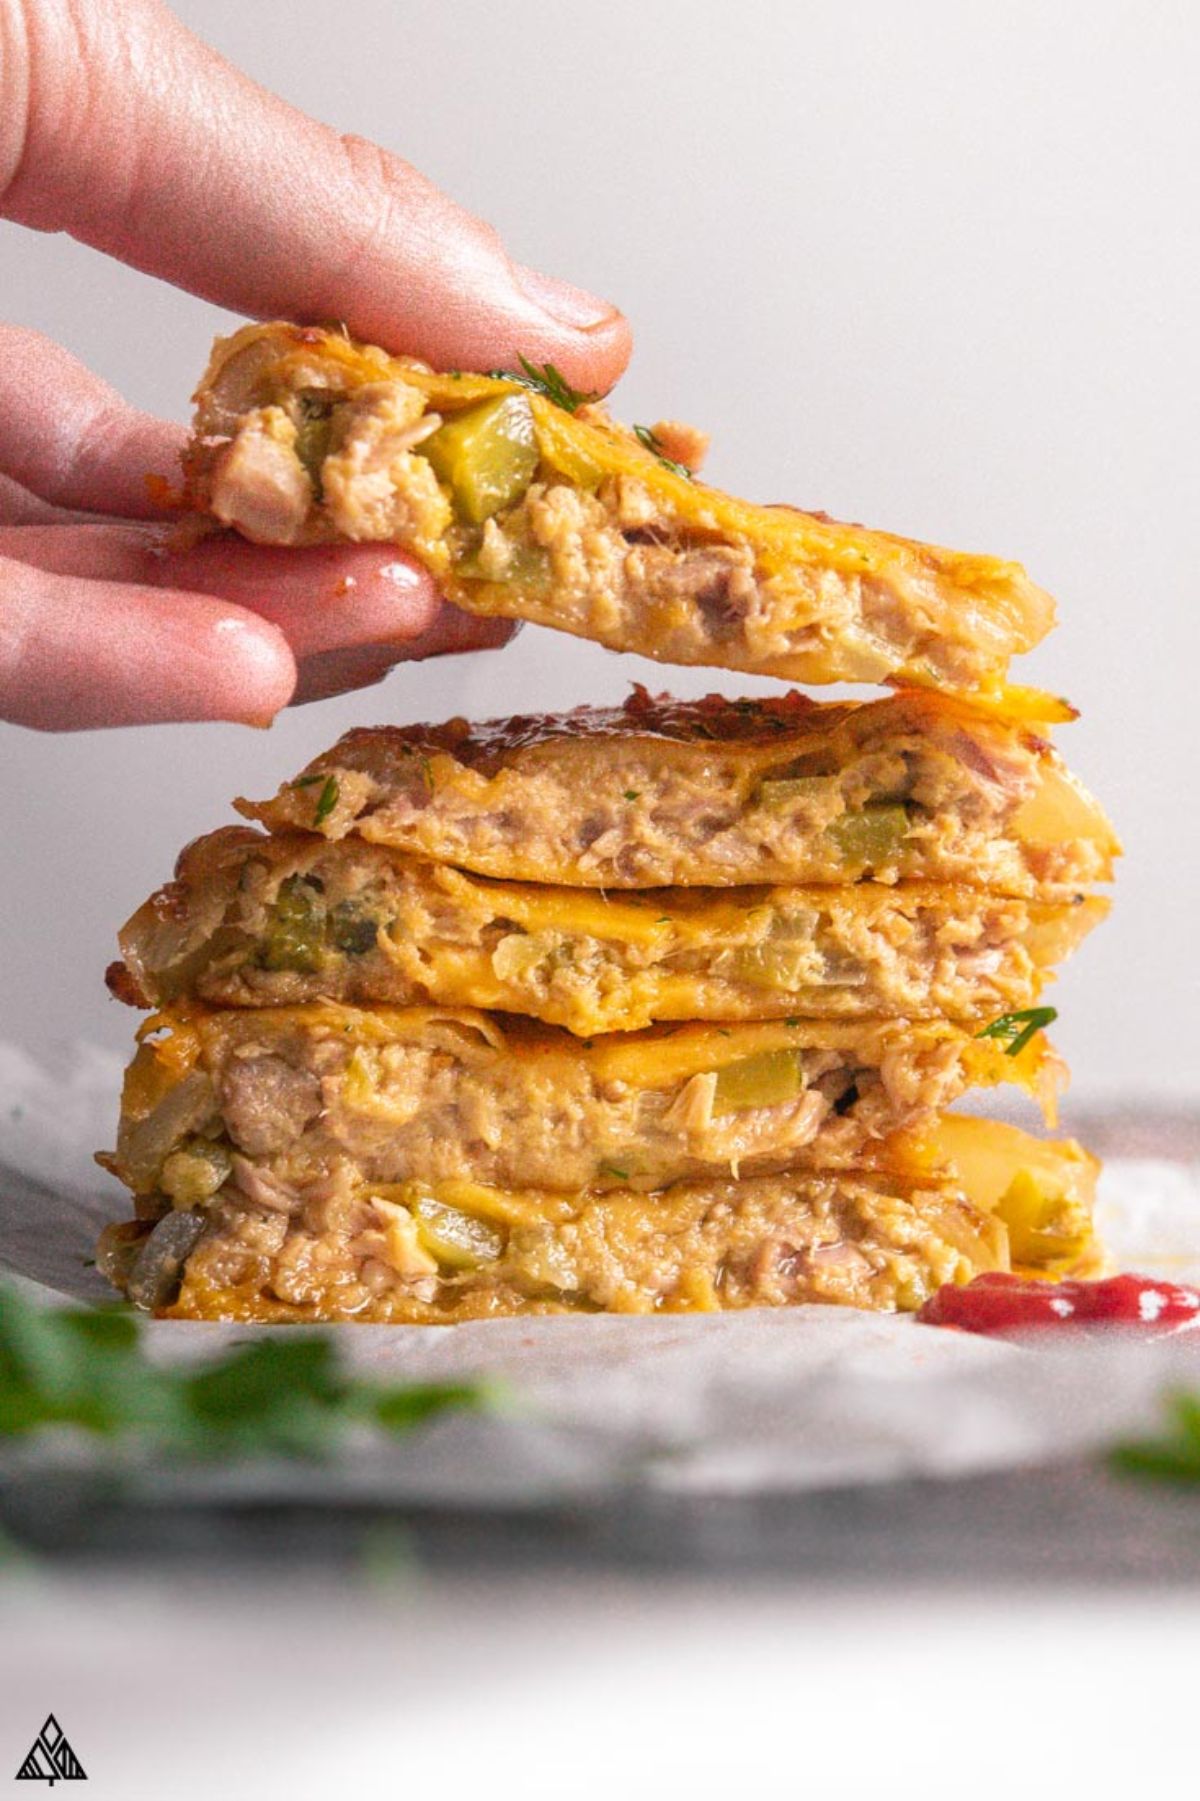 A hand reaches in from the left to pick up the top patty from a stack of 5 filled with cheesy tuna.